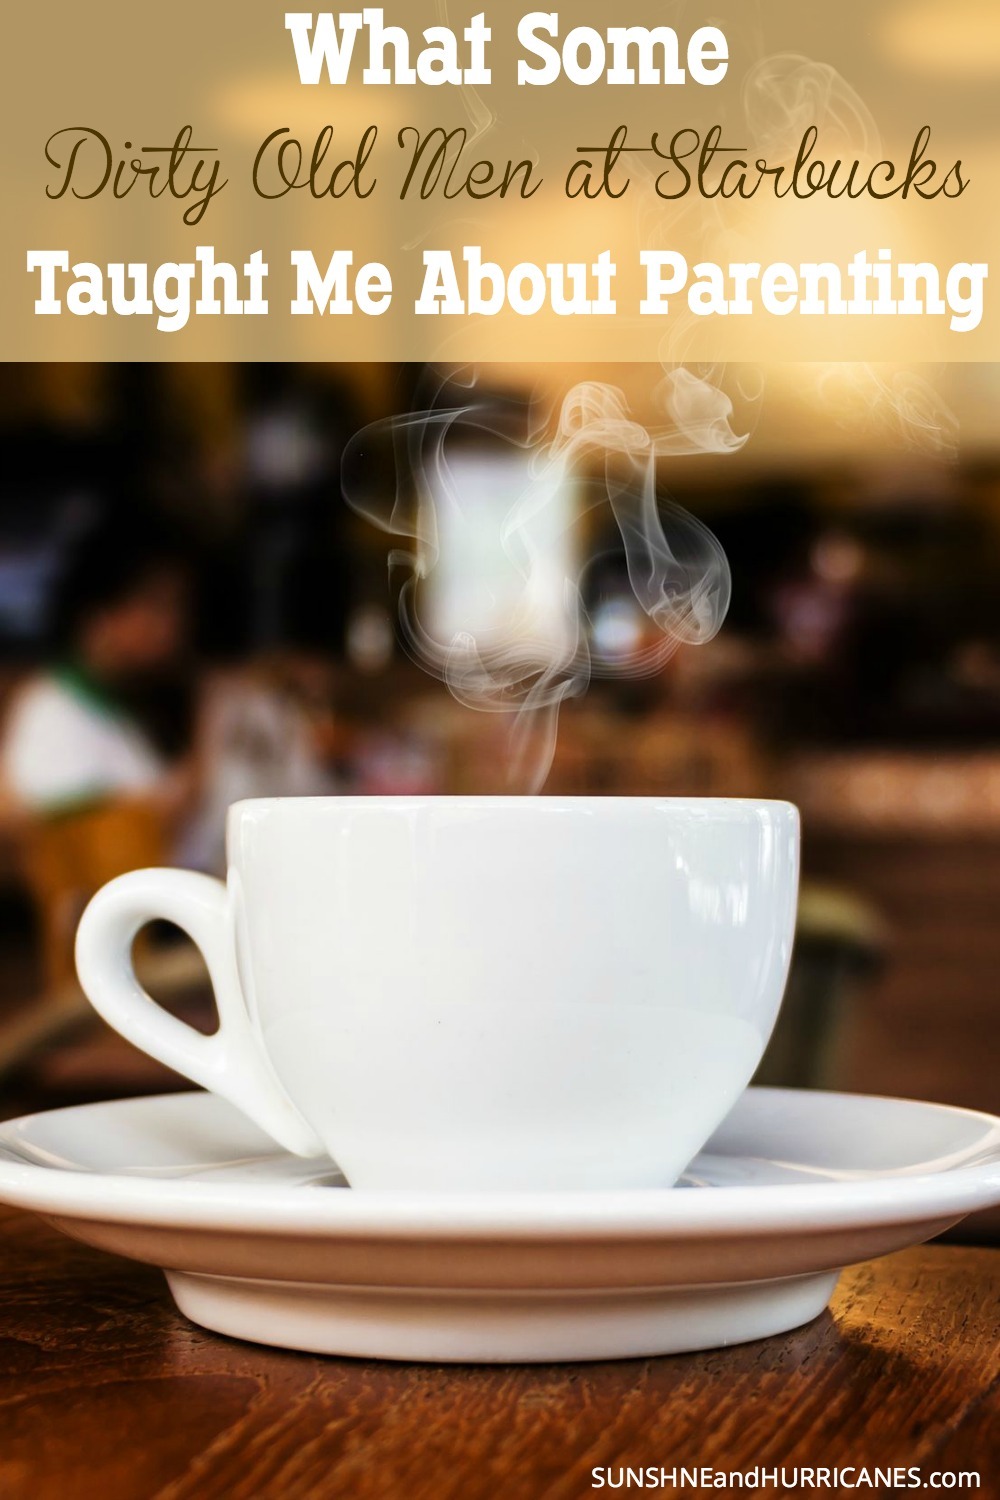 That day when I entered my over-crowded local Starbucks and sat down next to a group of old men, I never expected they would teach me one of my valuable lessons in parenting so far. What Some Dirty Old Men in Starbucks Taught Me About Parenting. SunshineandHurricanes.com